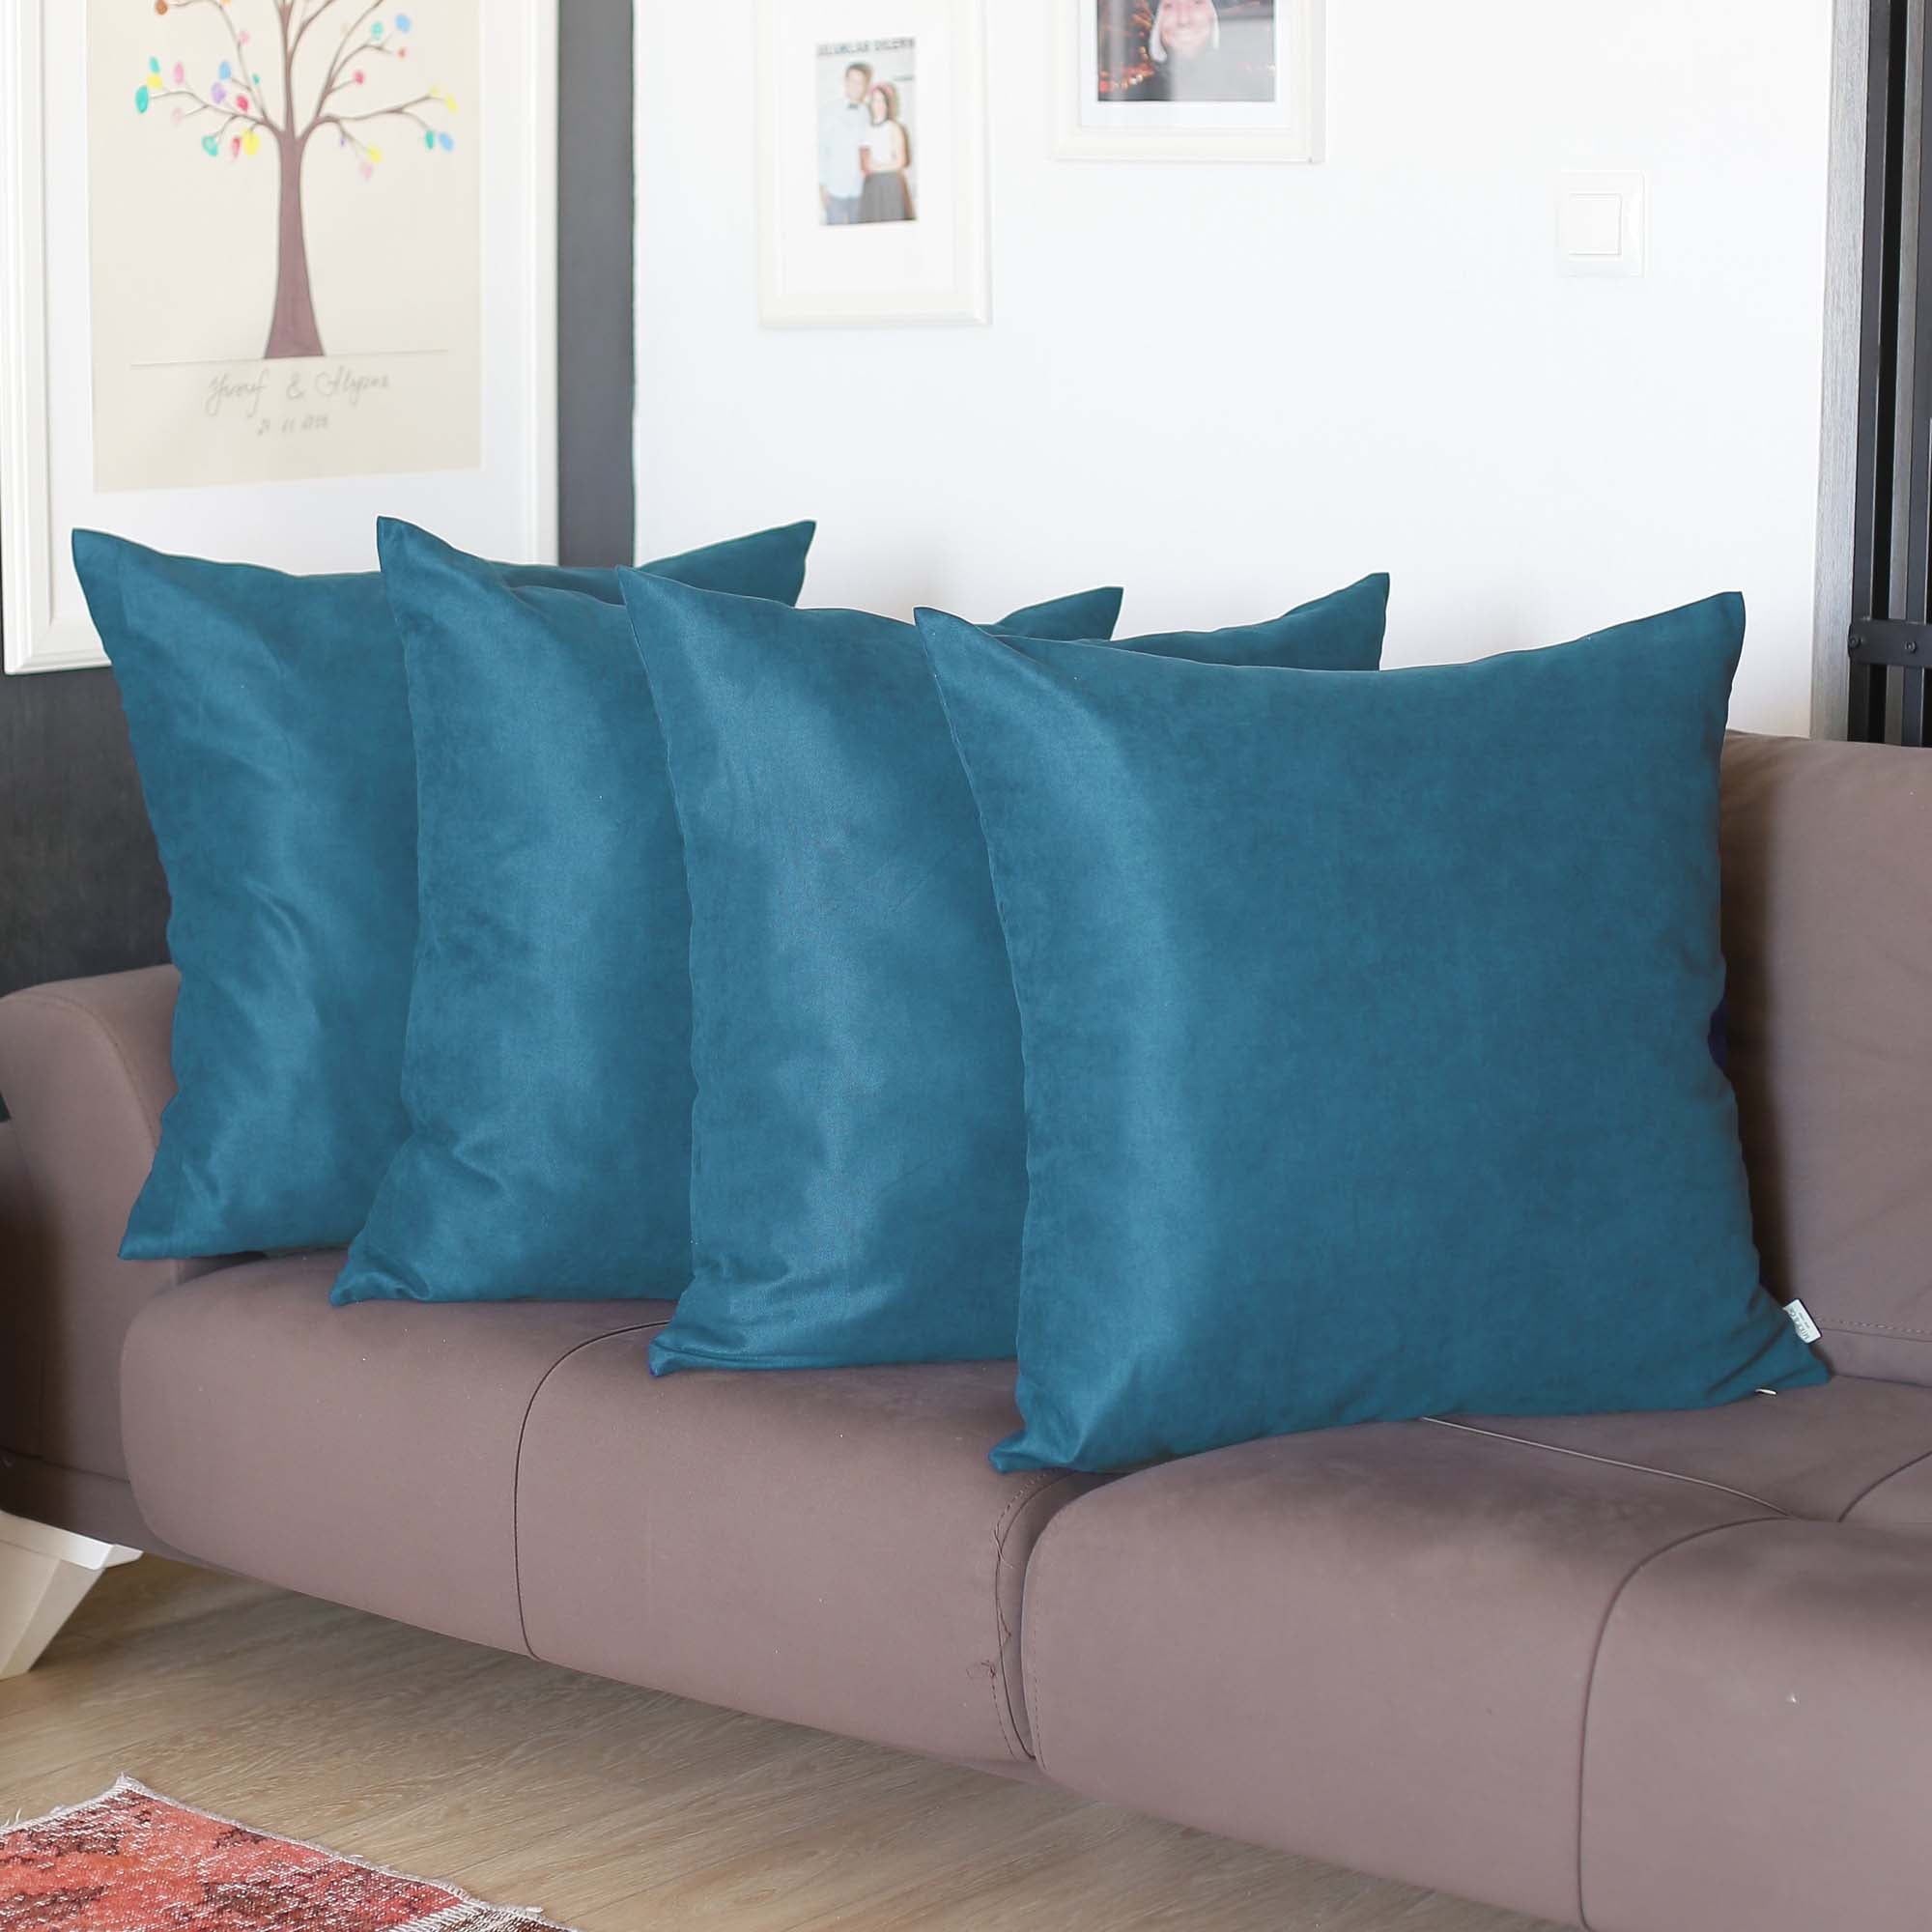 Teal Throw Pillow Covers Decorative Pillows for Couch Pillows 18 X 18 Inch  Turquoise Throw Pillow Case for Bedroom Sofa Living Room 4 Pack Cojines  Decorativos para Sala 